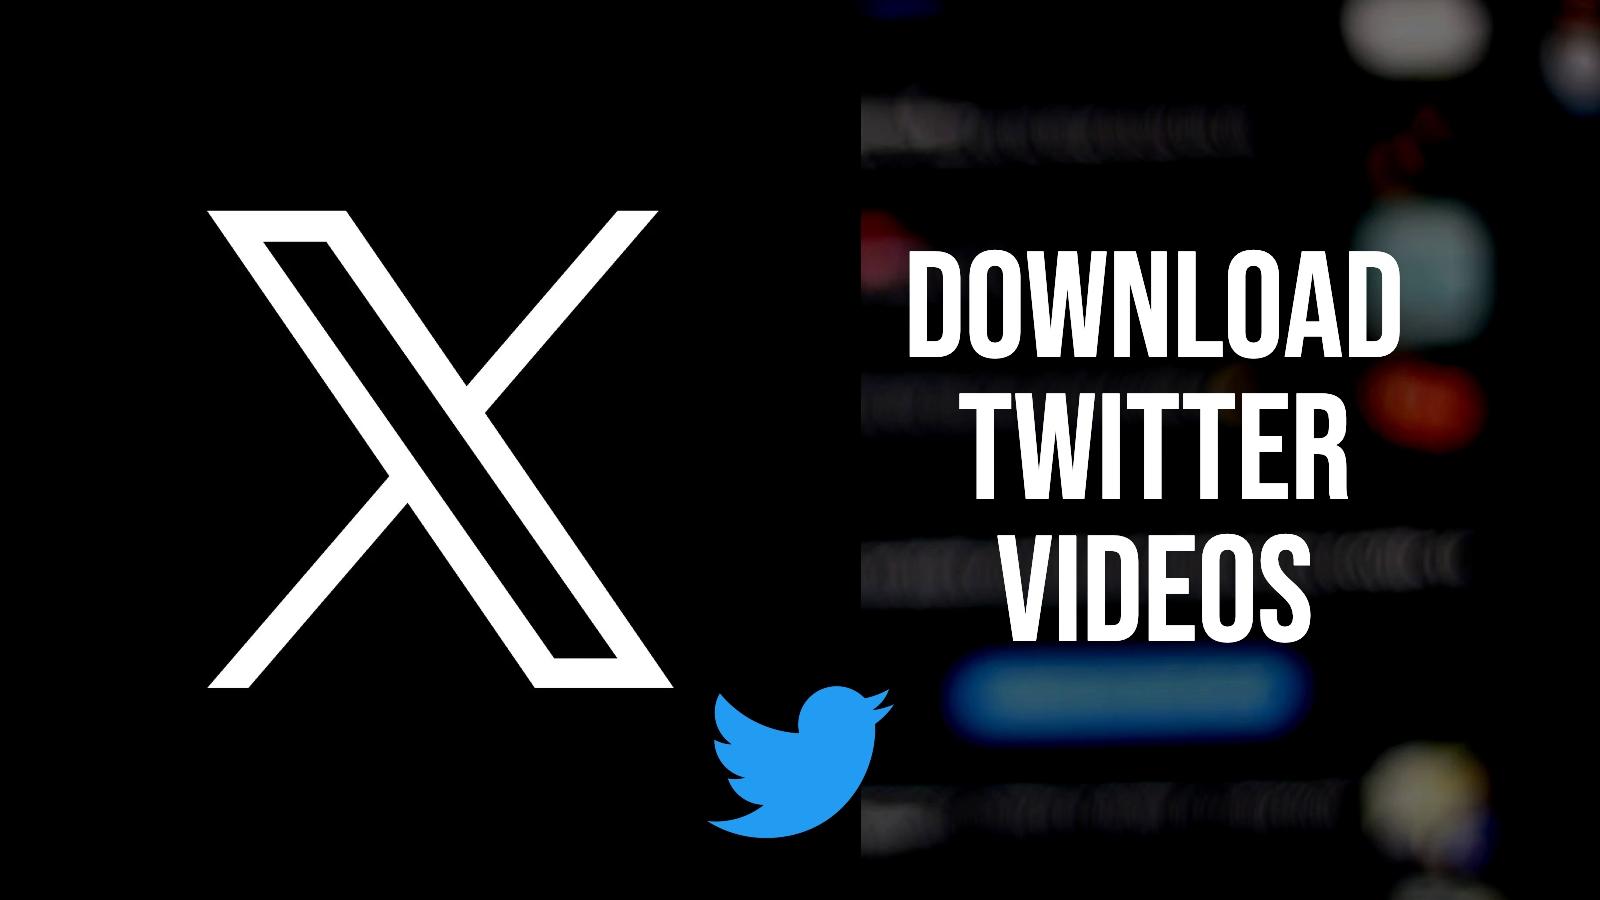 New premium video content coming to Twitter